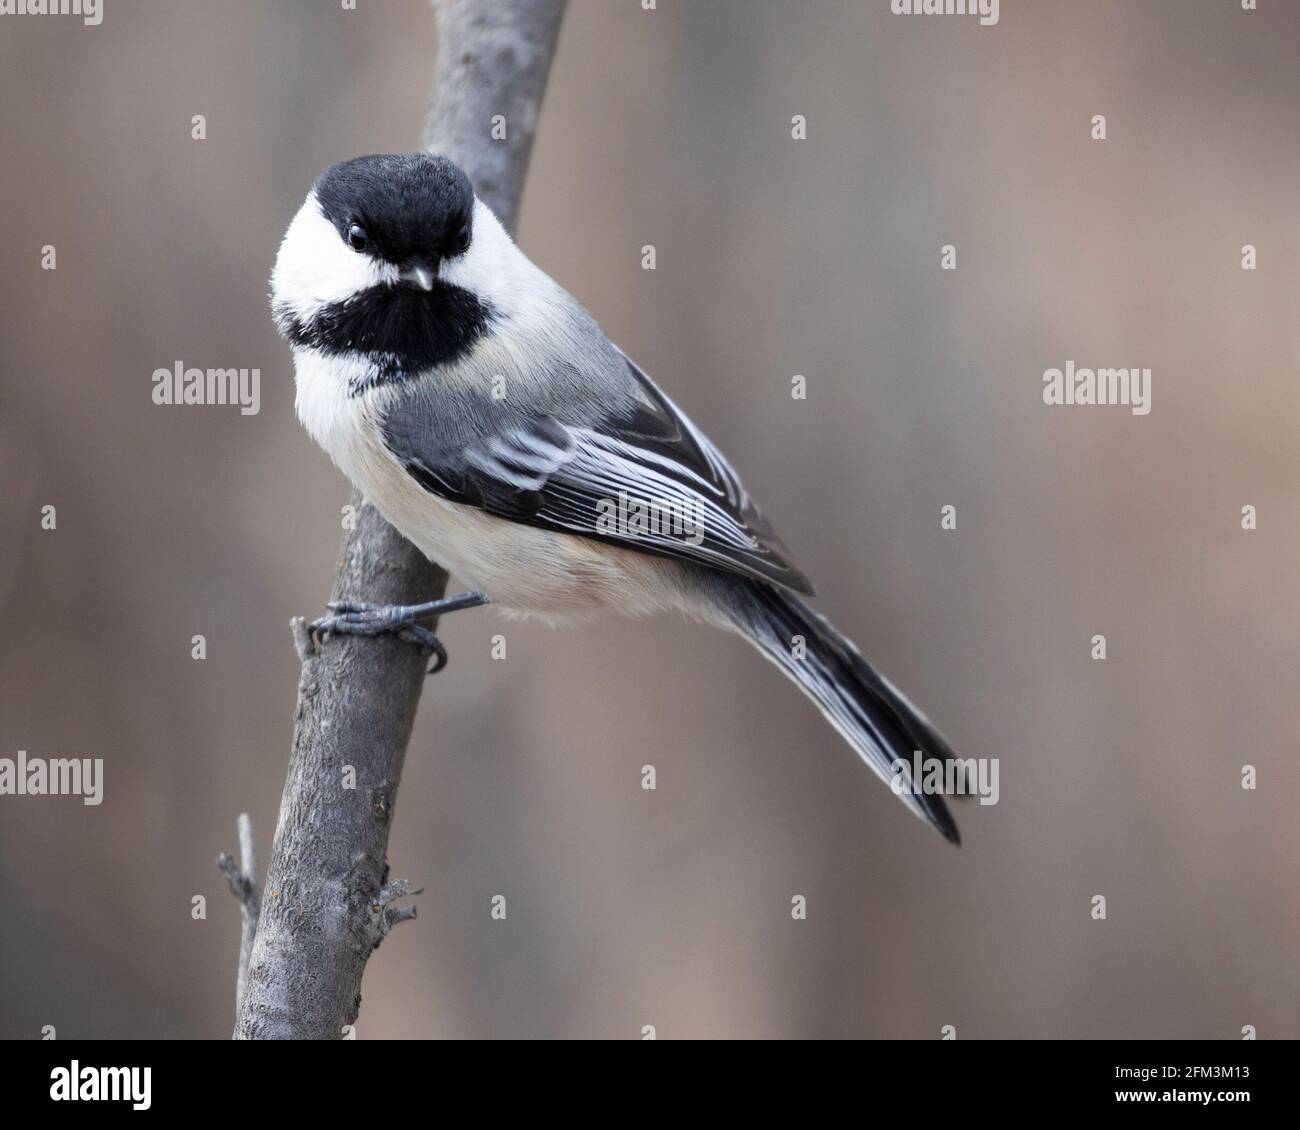 Black-capped chickadee (Poecile atricapillus) perched on tree Stock Photo